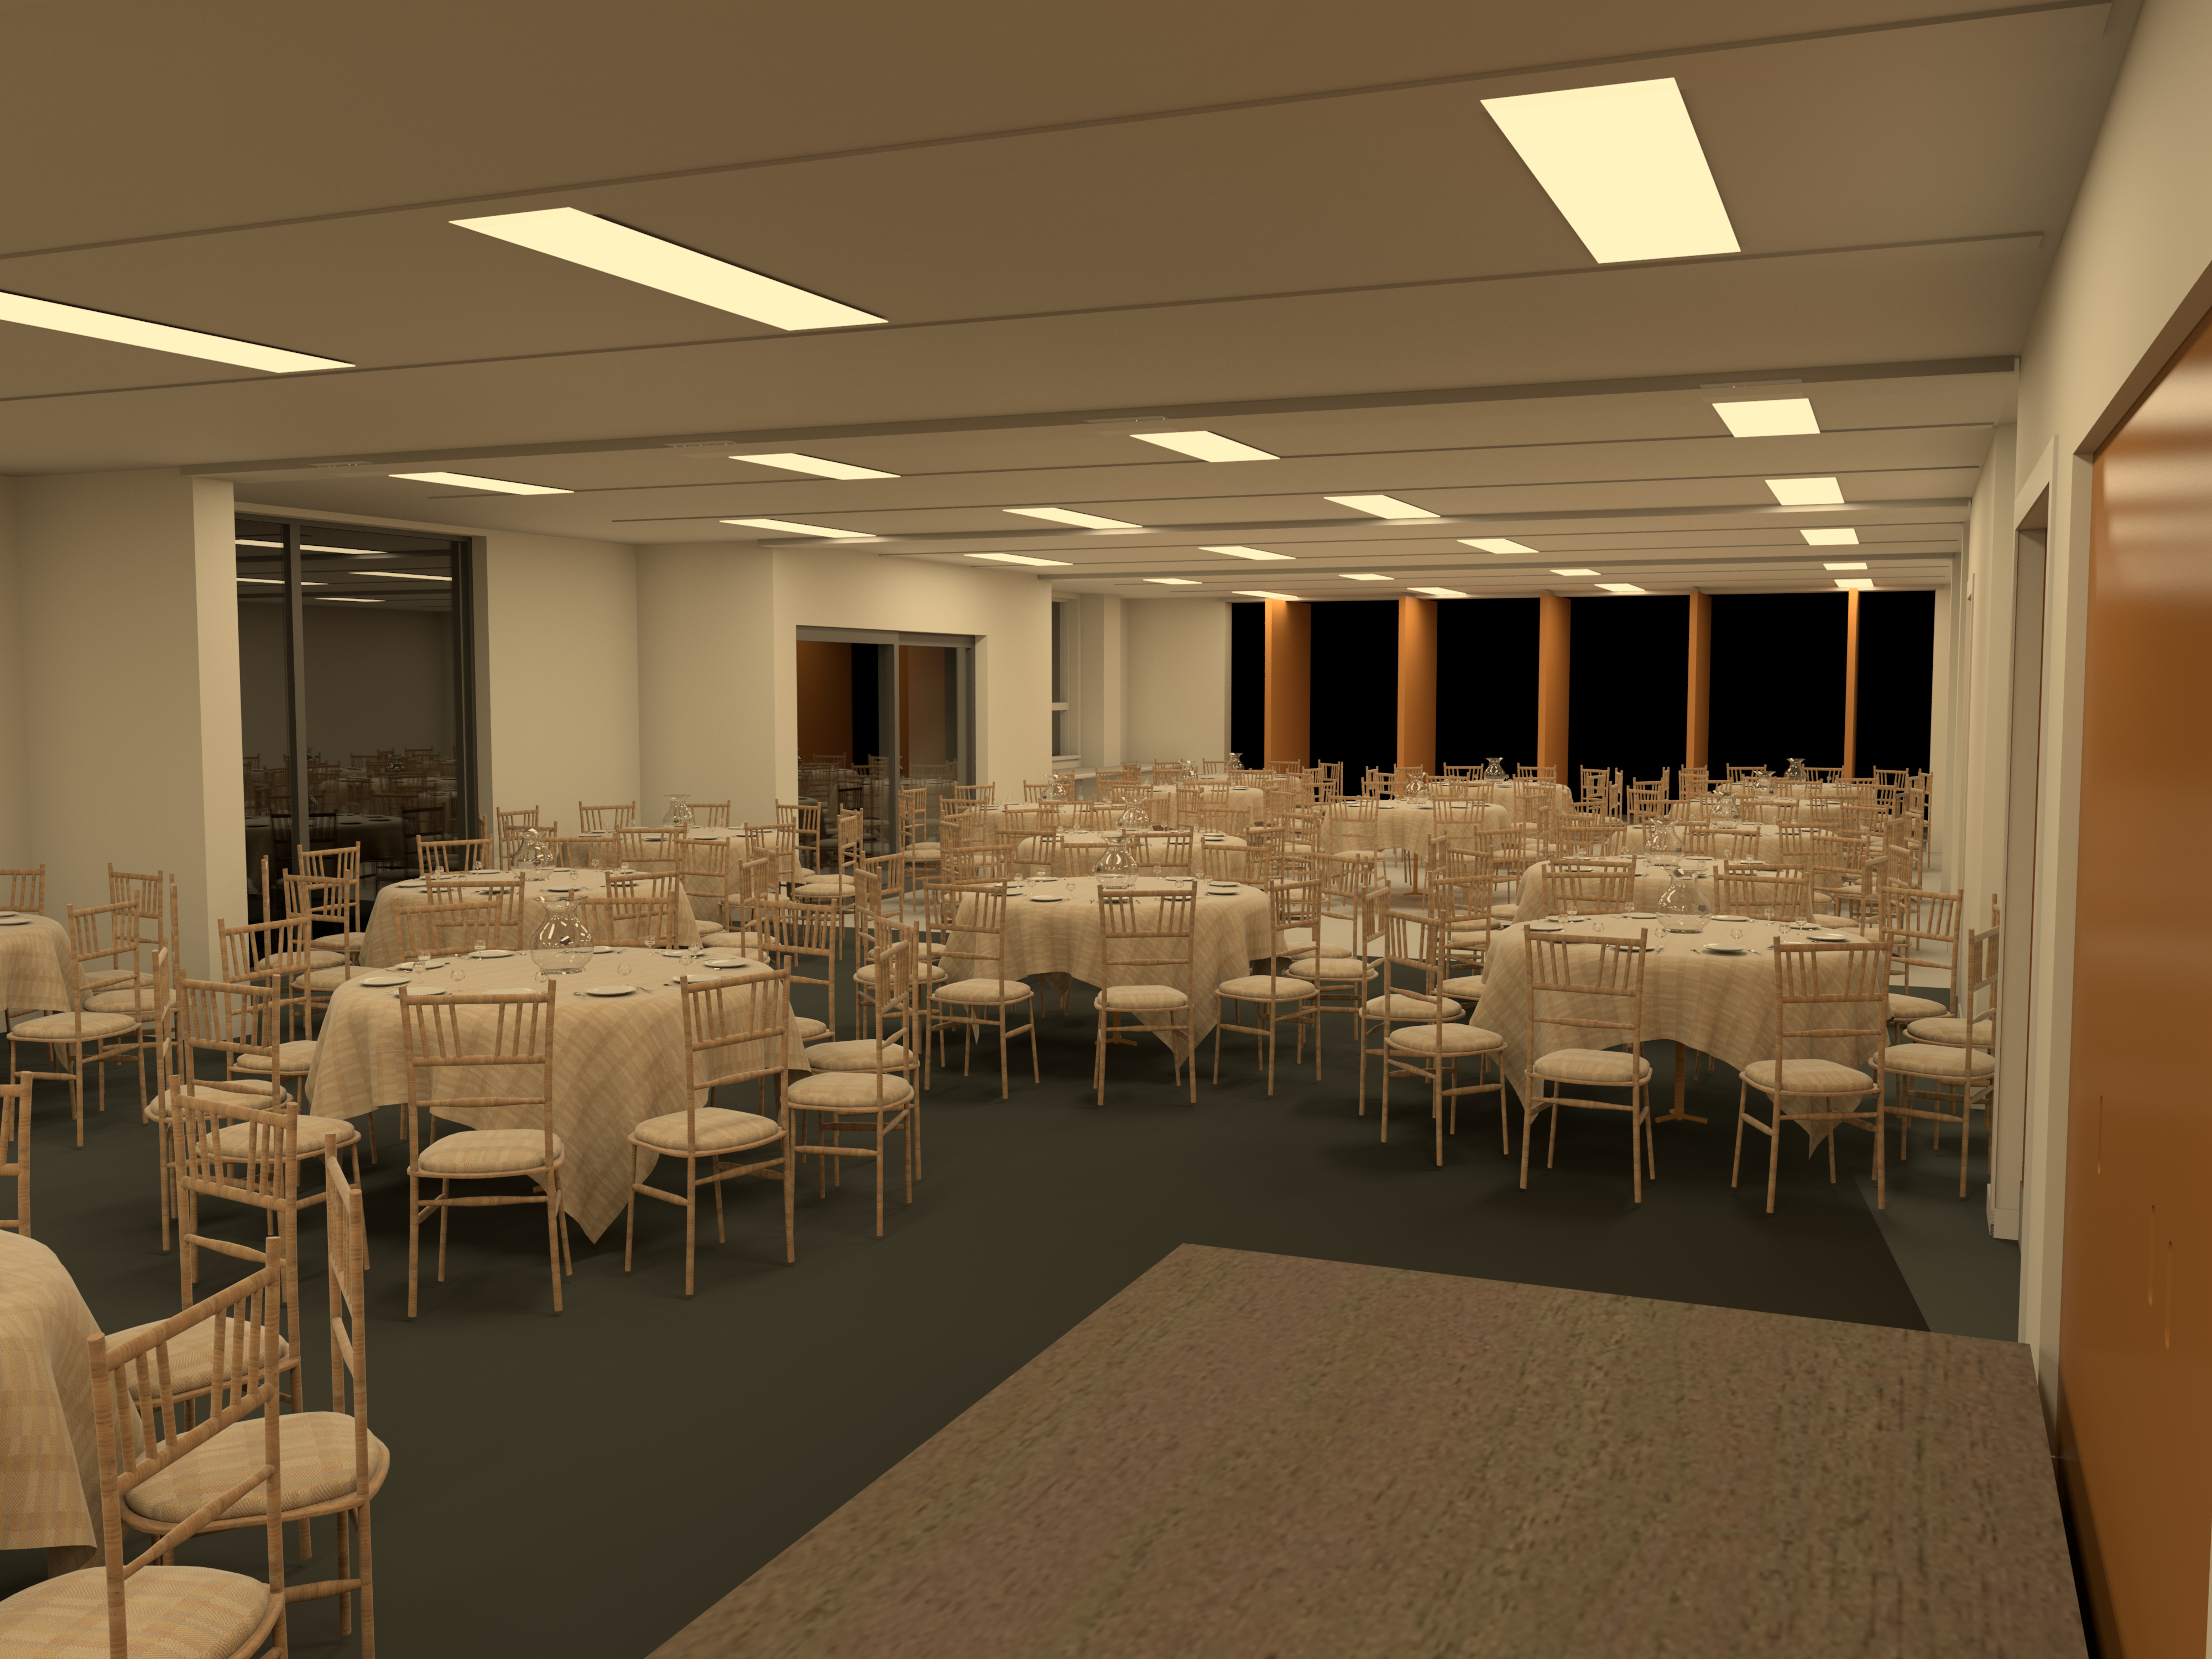 A realistic 3D render of a round table dinner party. A long shot showing the length of the room.